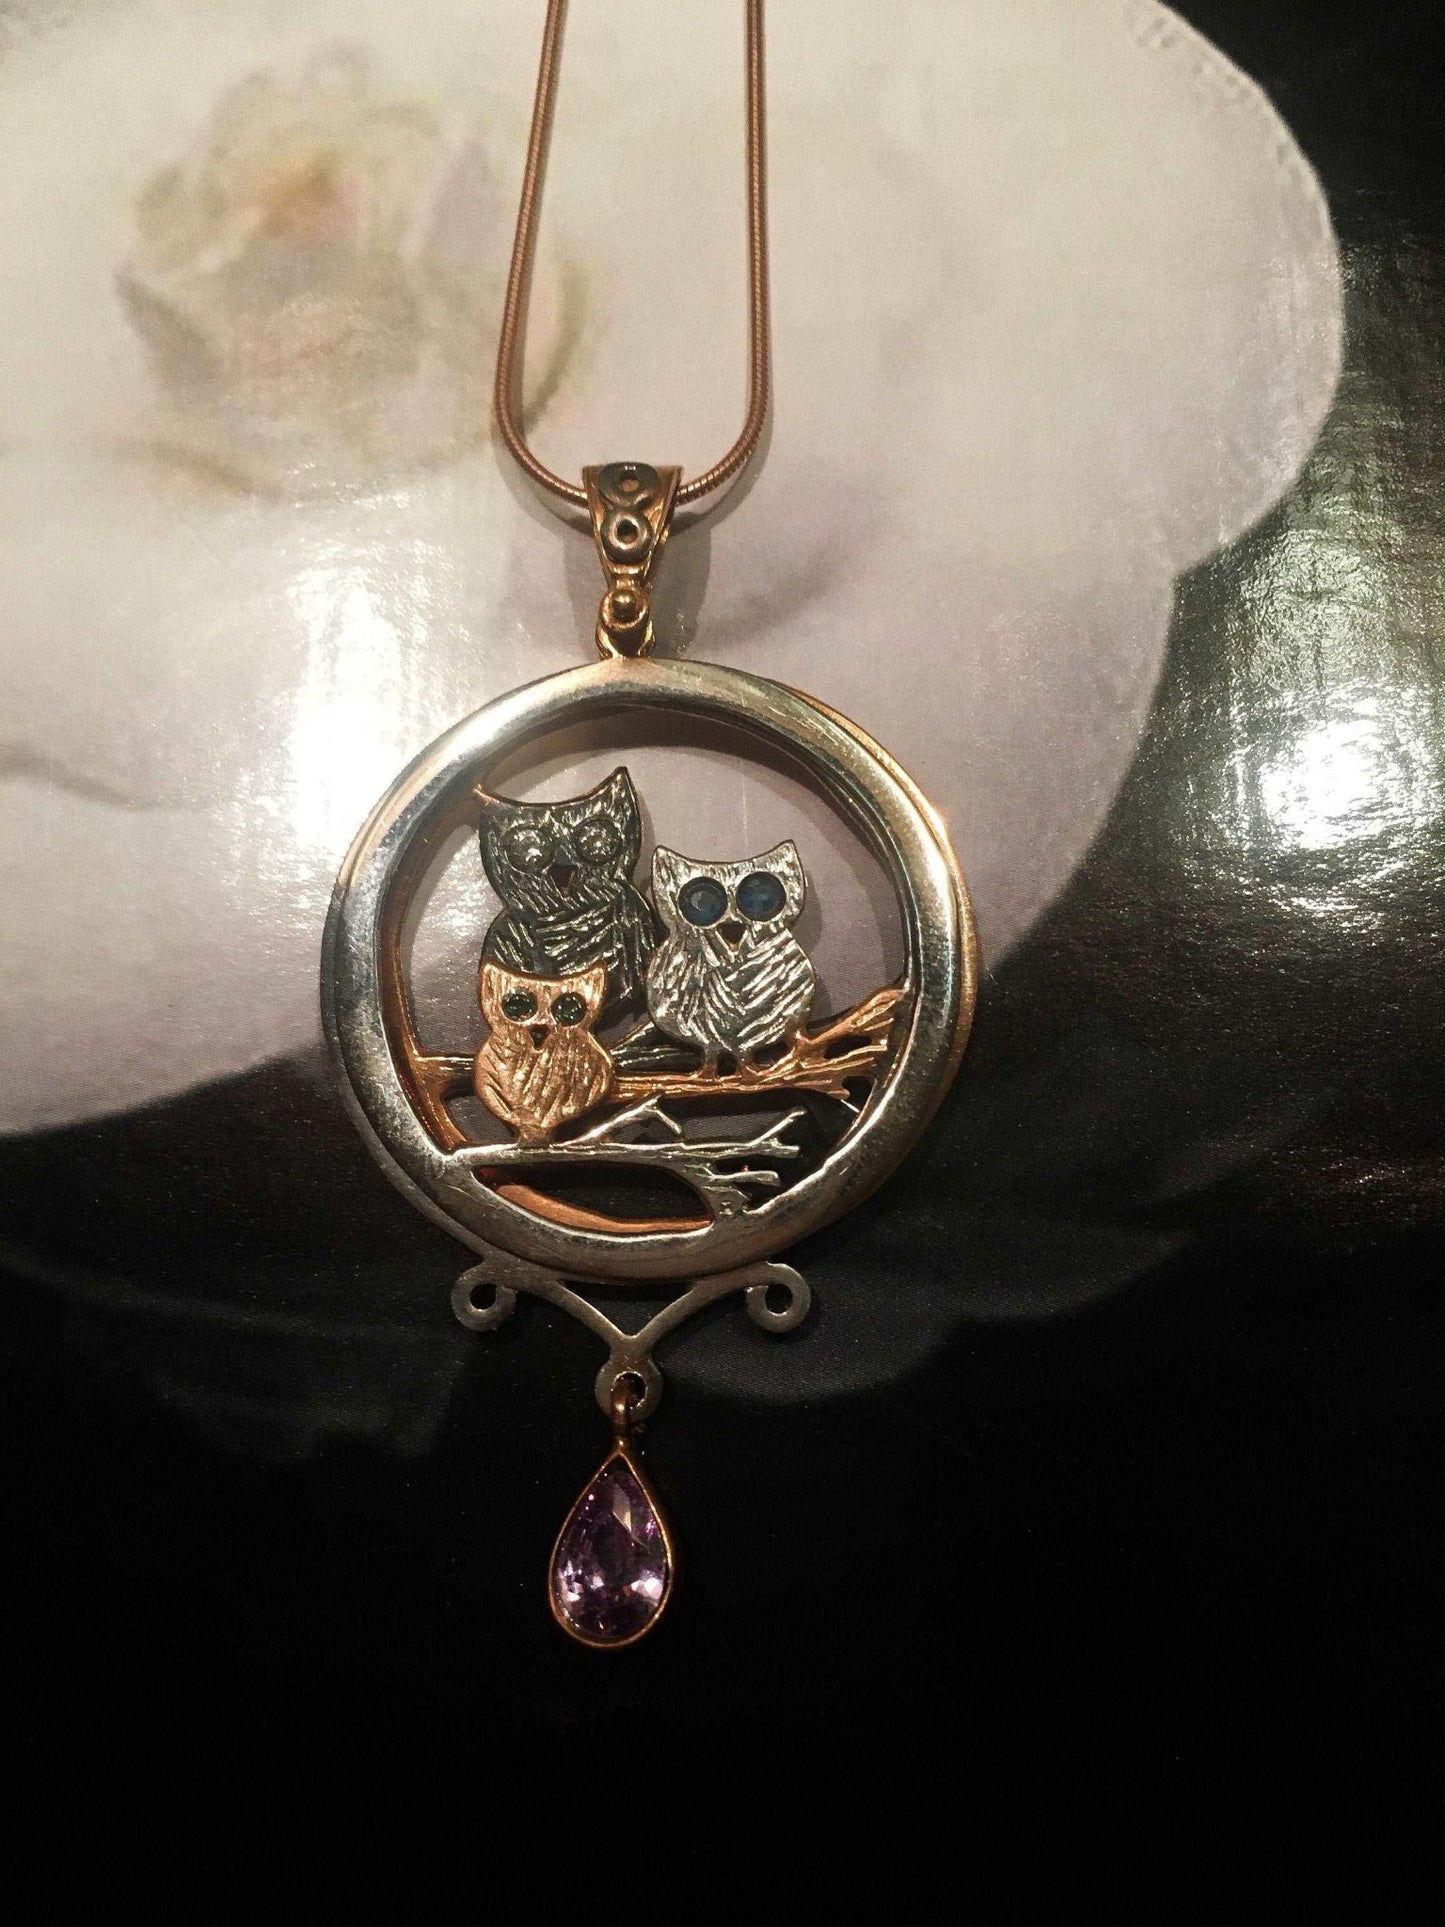 Moving Owl Amethyst Stone Pendant, Custom Desing Handmade Rose Gold Owl Necklace, Animal Jewelry For Her, Mother's Day Gift - Tracesilver